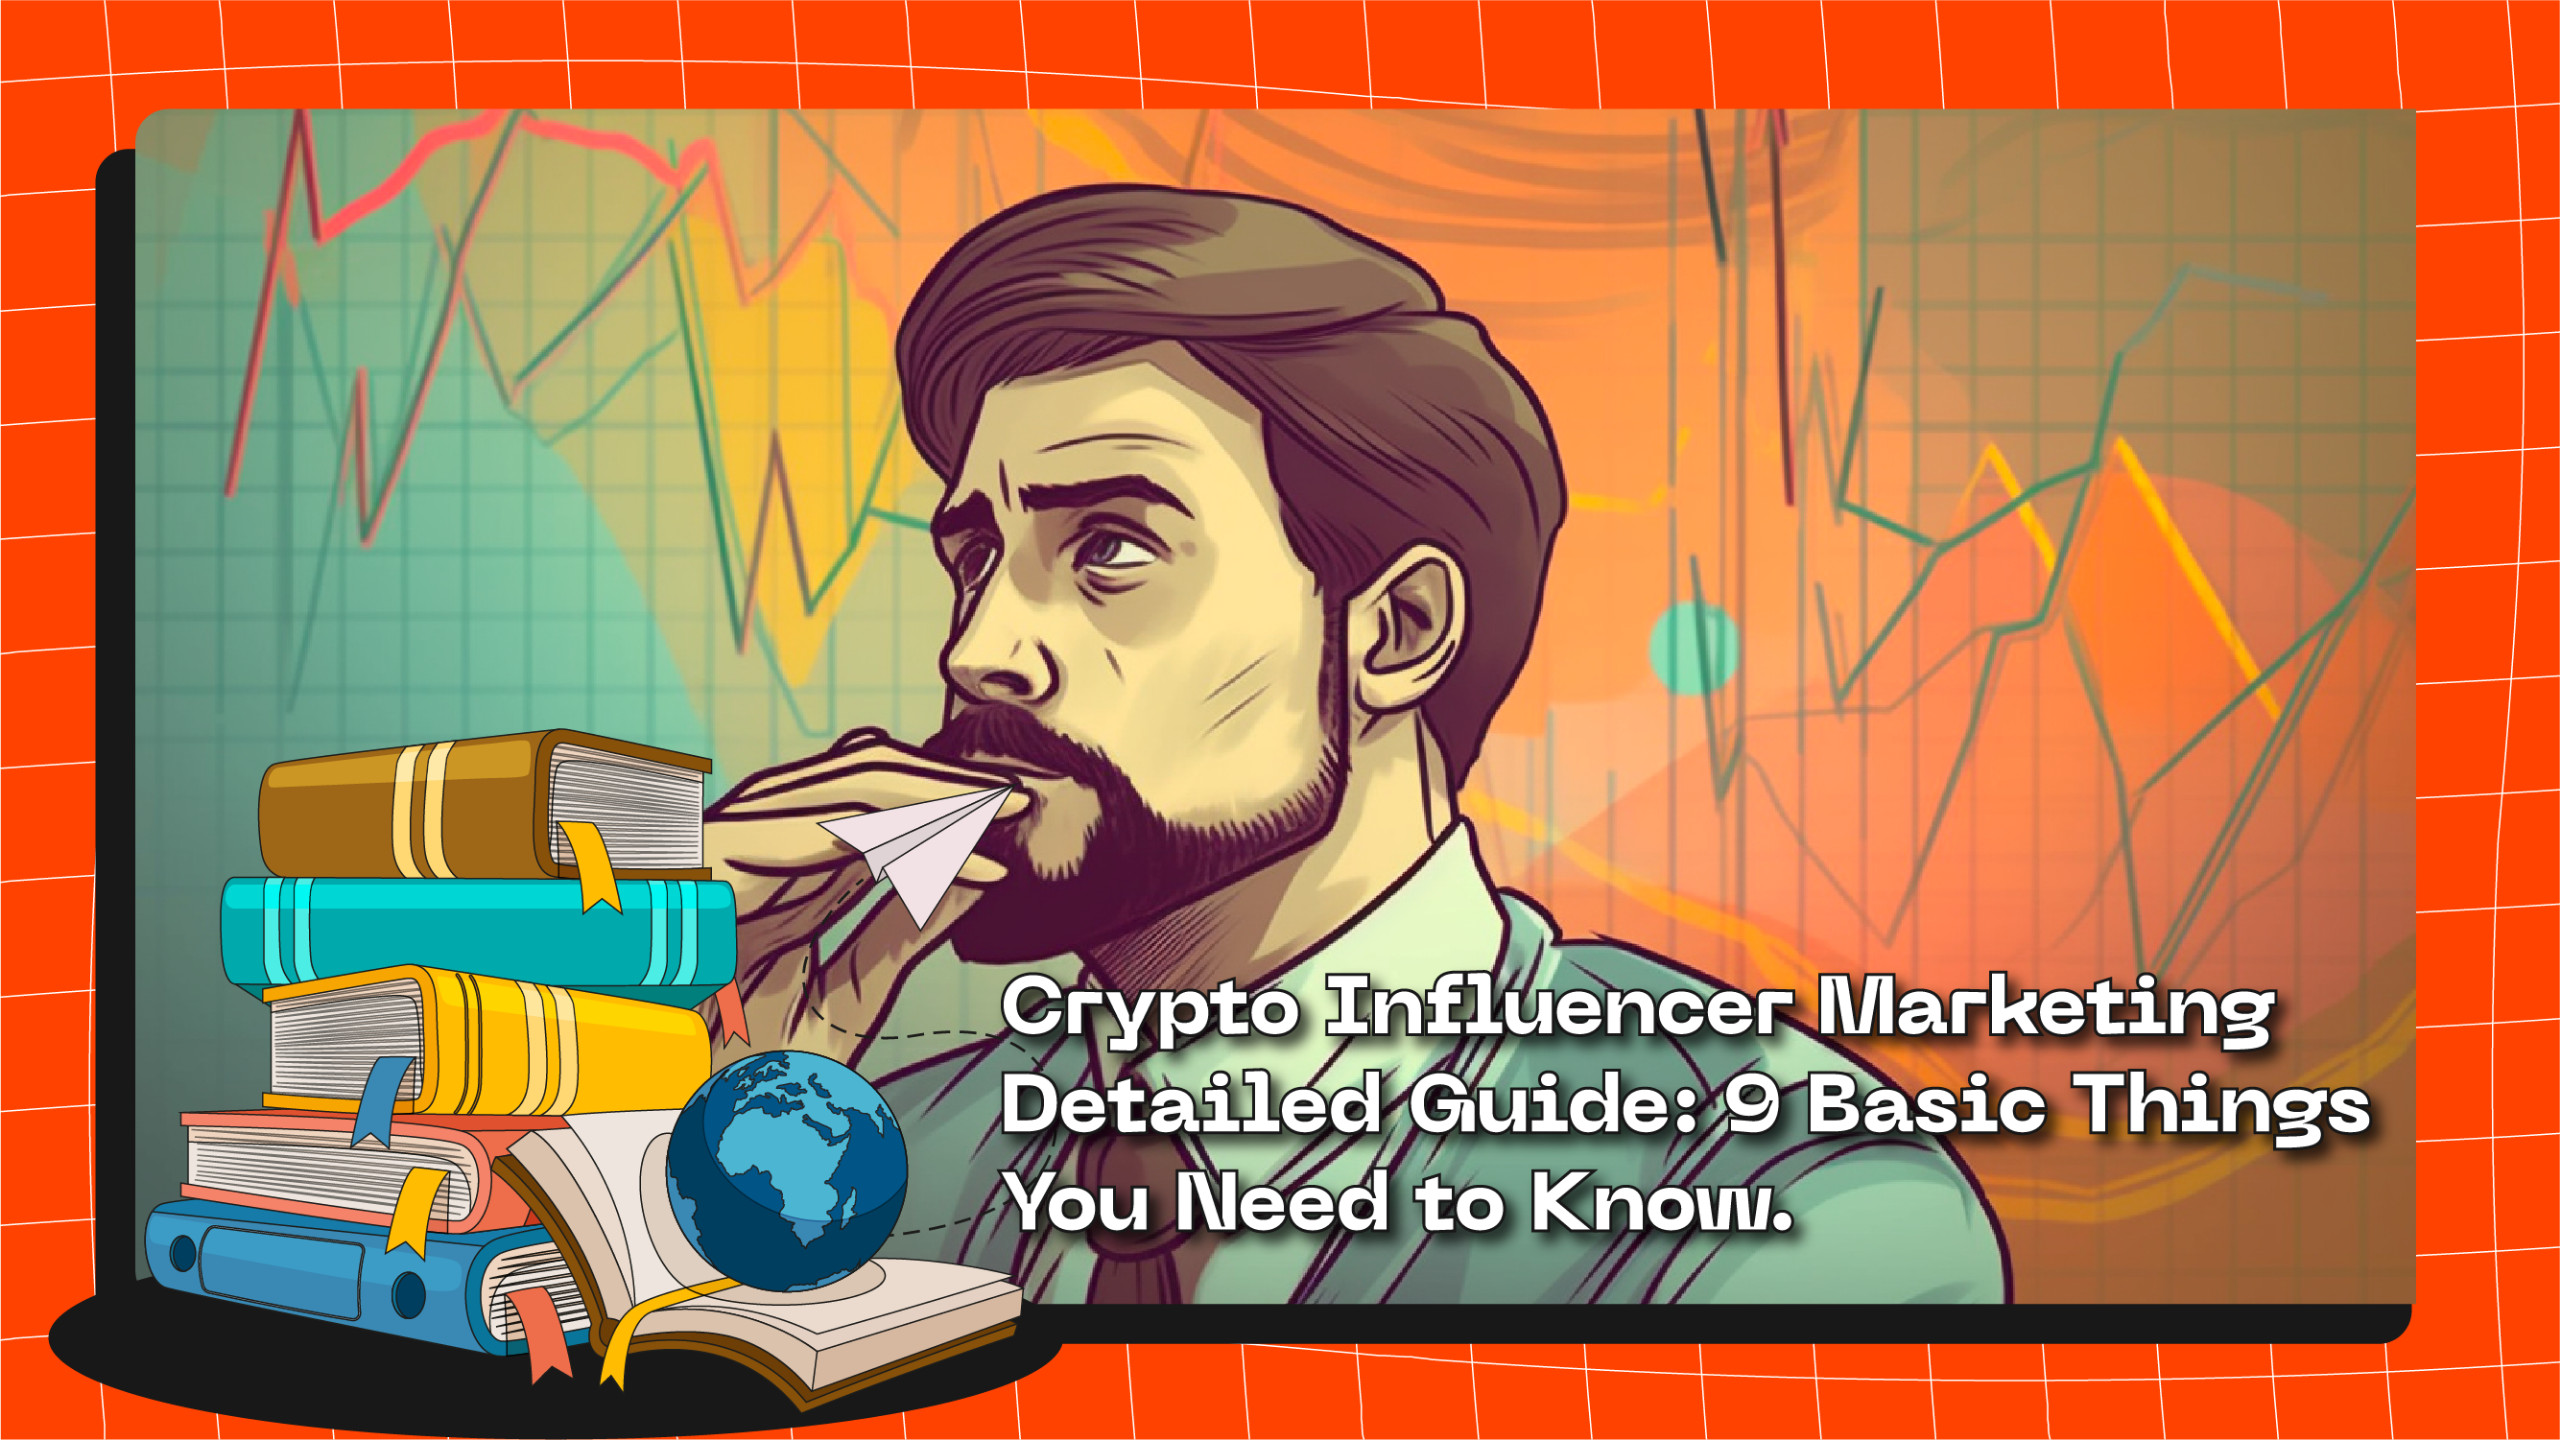 crypto influencer marketing detailed guide: 9 basic things you need to know